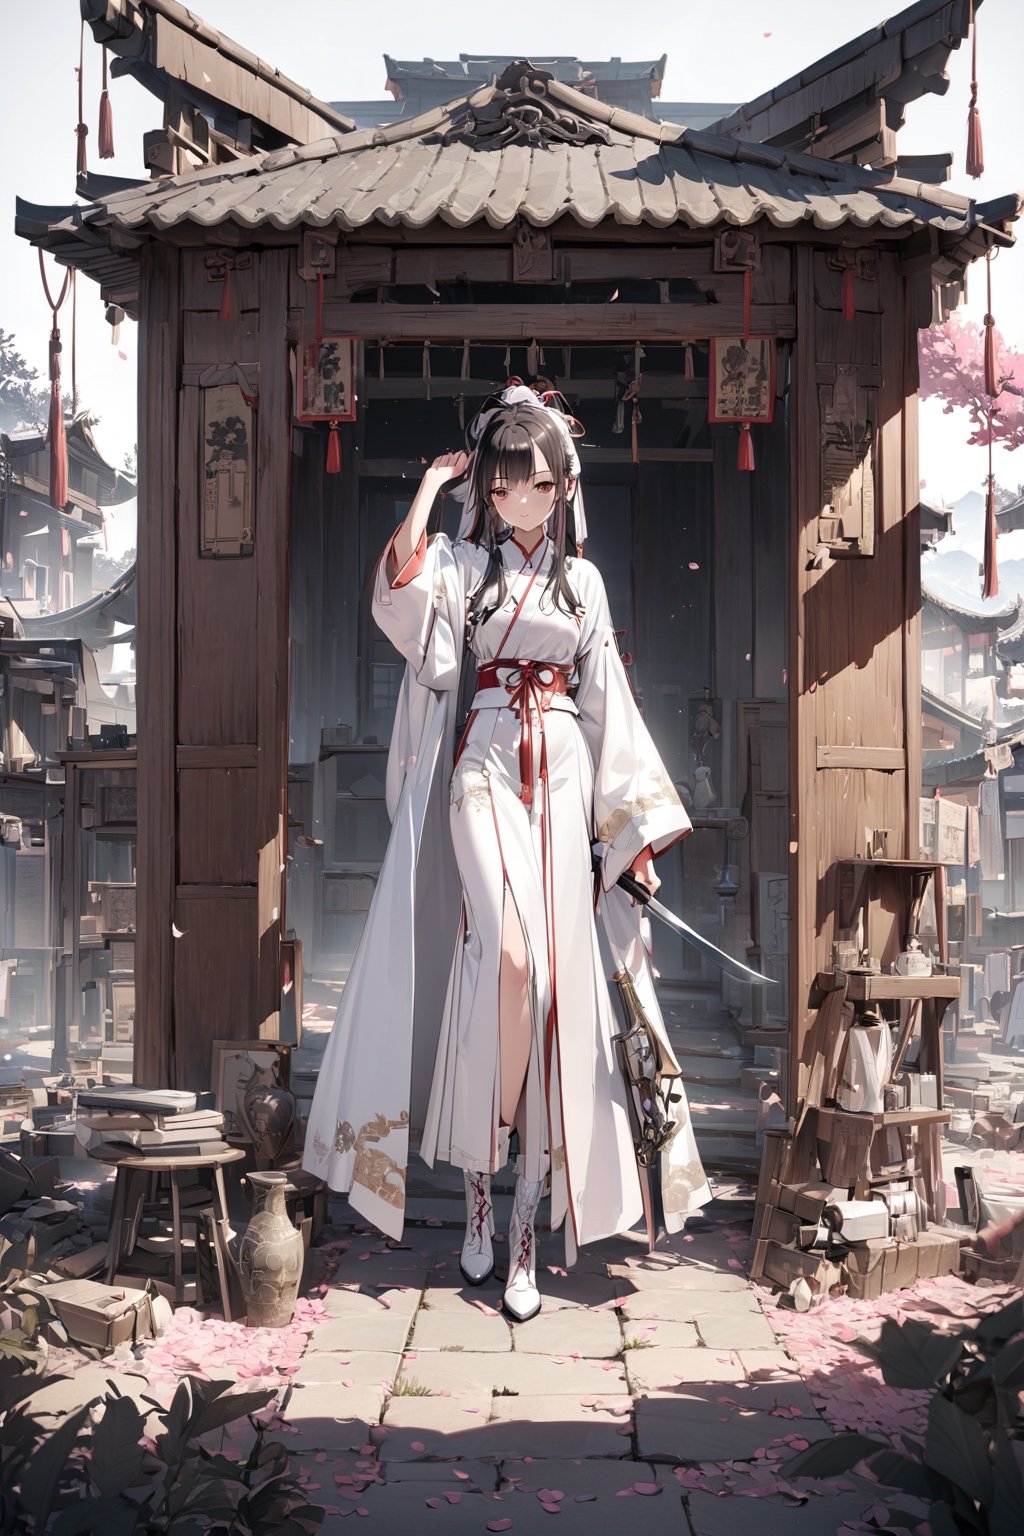 8k, high quality, masterpiece: 1.3), miniature model, white background, 3D isometric style, center, solo, full body,

1 Chinese woman, 26yo, long black hair, pink petals on the forehead, wearing a red and white Chinese robe, white plush at the neckline, wearing white leather boots, holding an iron-gray ancient long-handled weapon, the end of the weapon is two sharp knives, and the background is at the gate of the ancient Chinese camp.